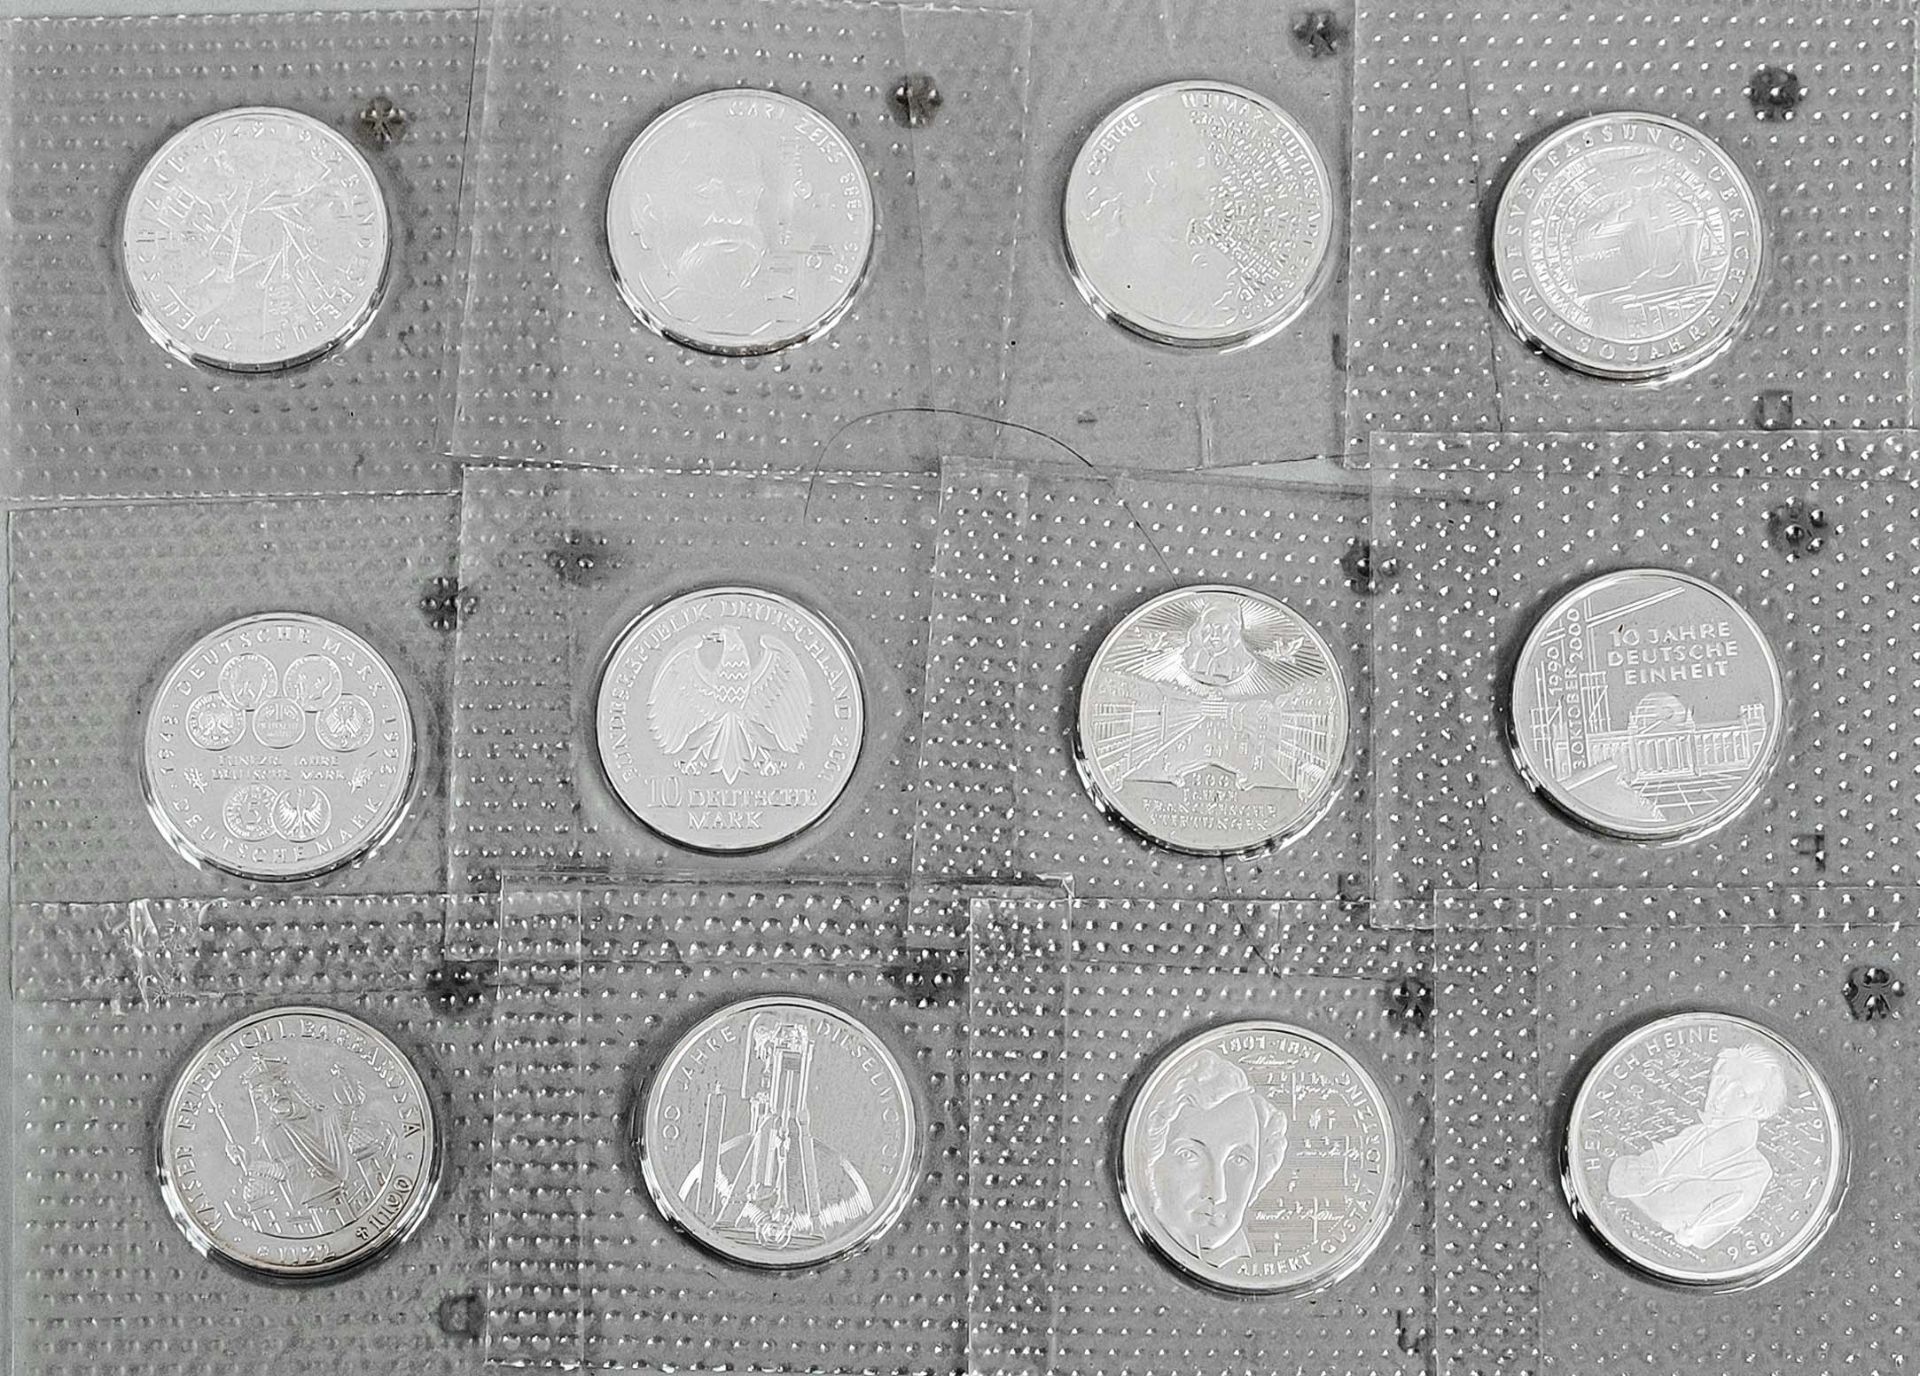 12 x 10 DM commemorative coins Federal Republic of Germany, 1988 - 2001, silver rubies All